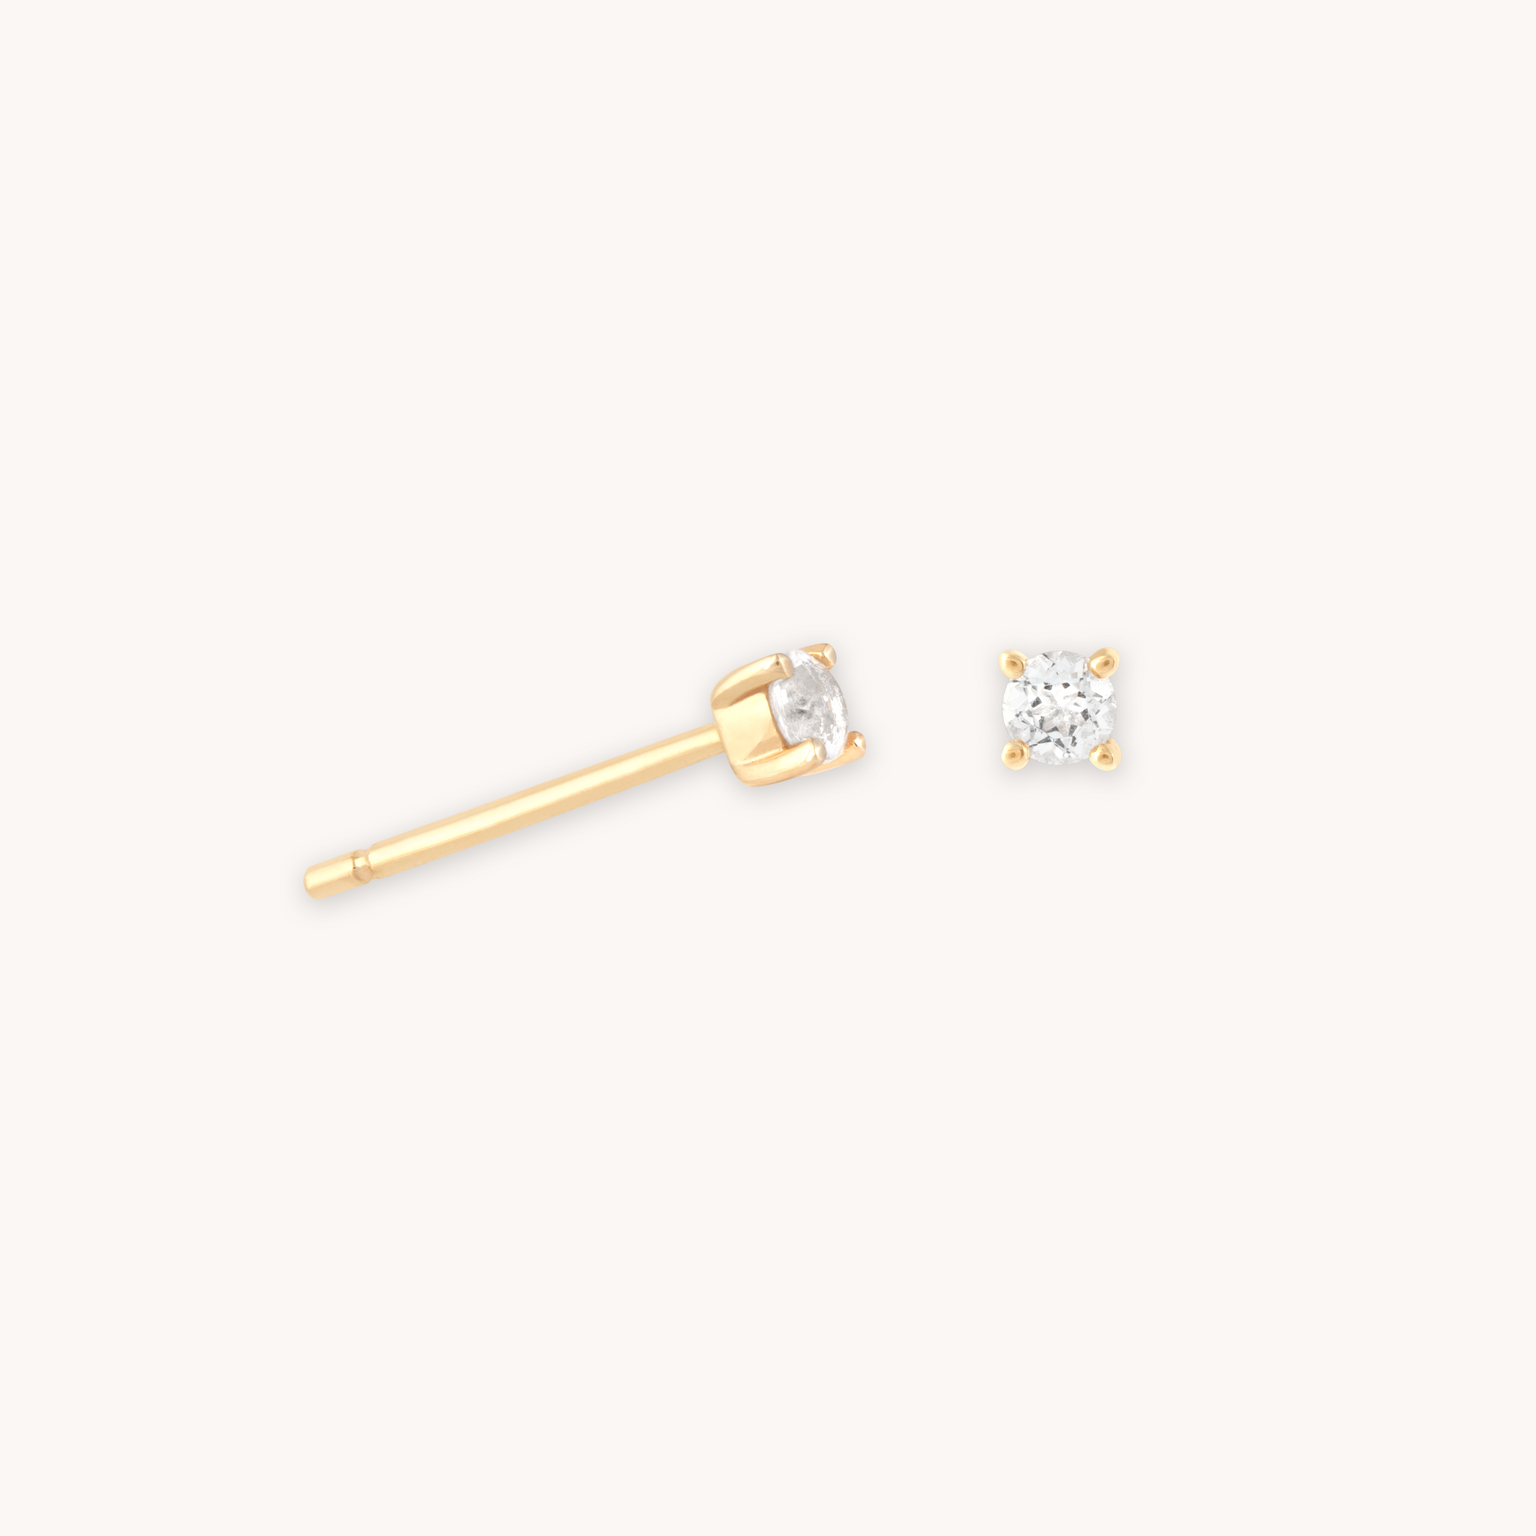 Topaz Stud Earrings in Solid Gold cut out